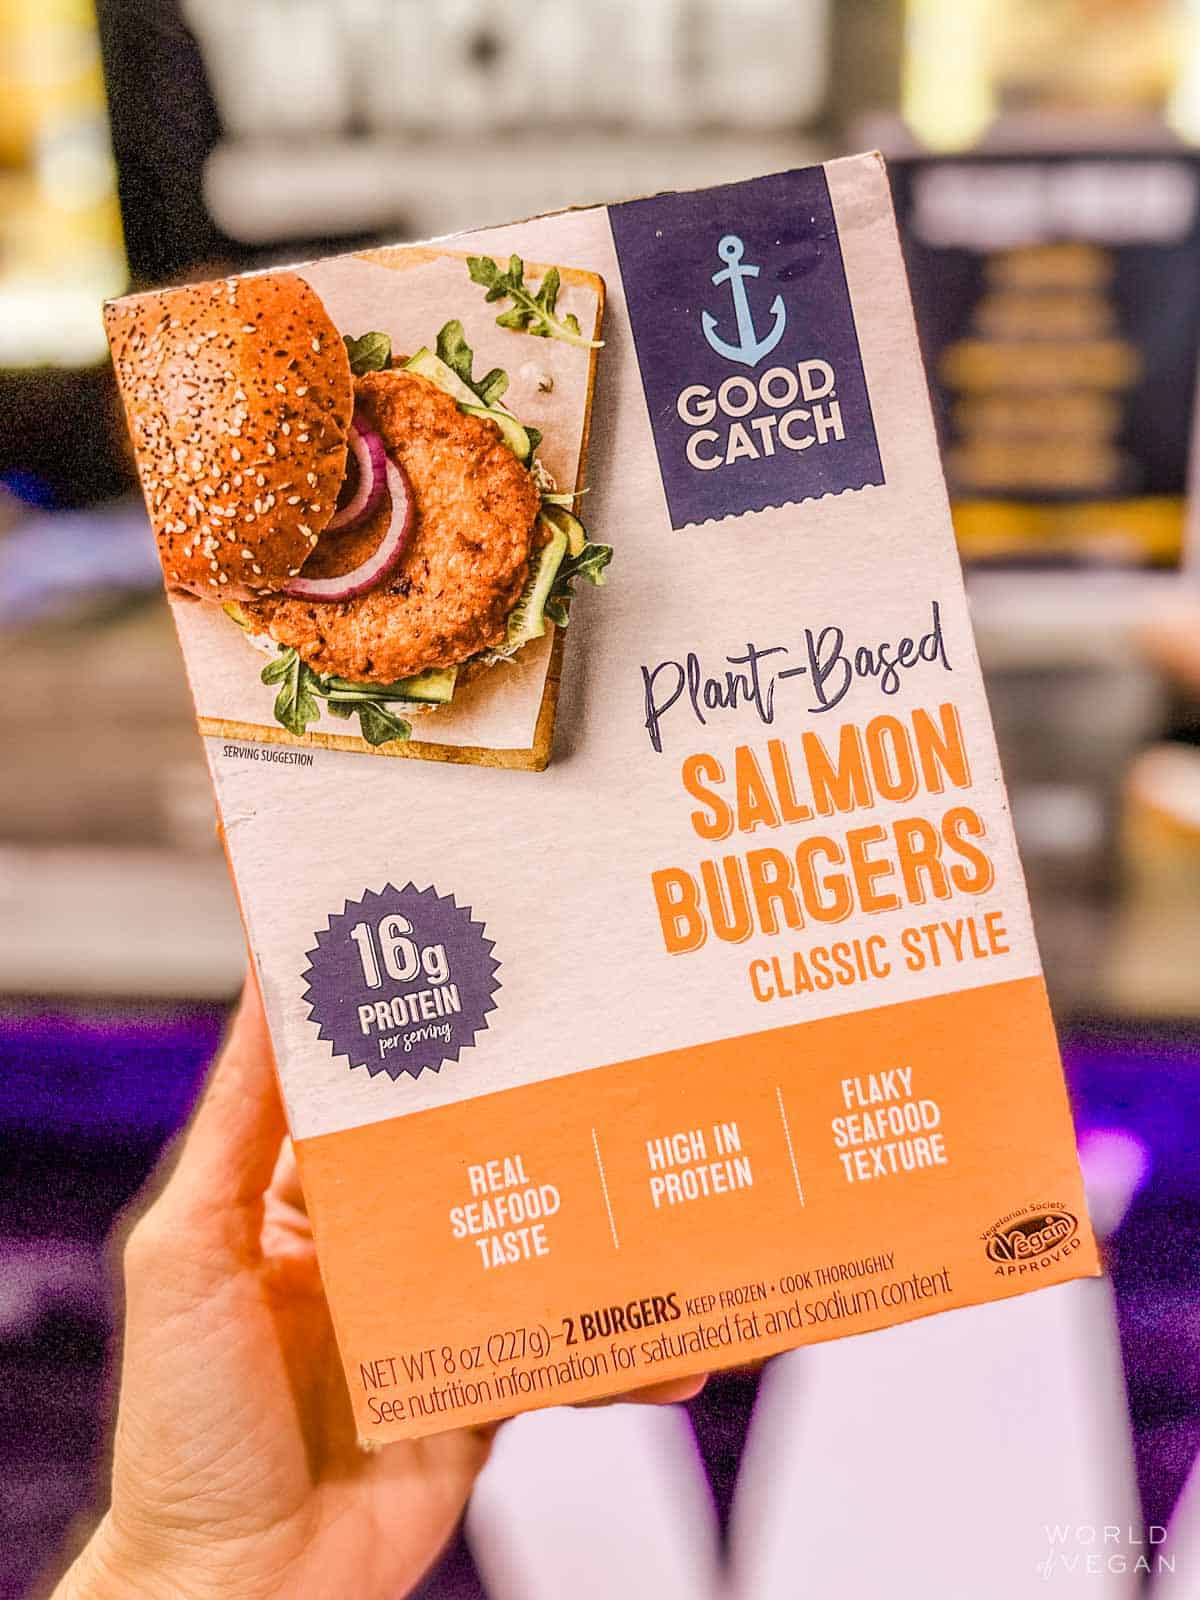 A package of Good Catch brand plant-based salmon burgers.